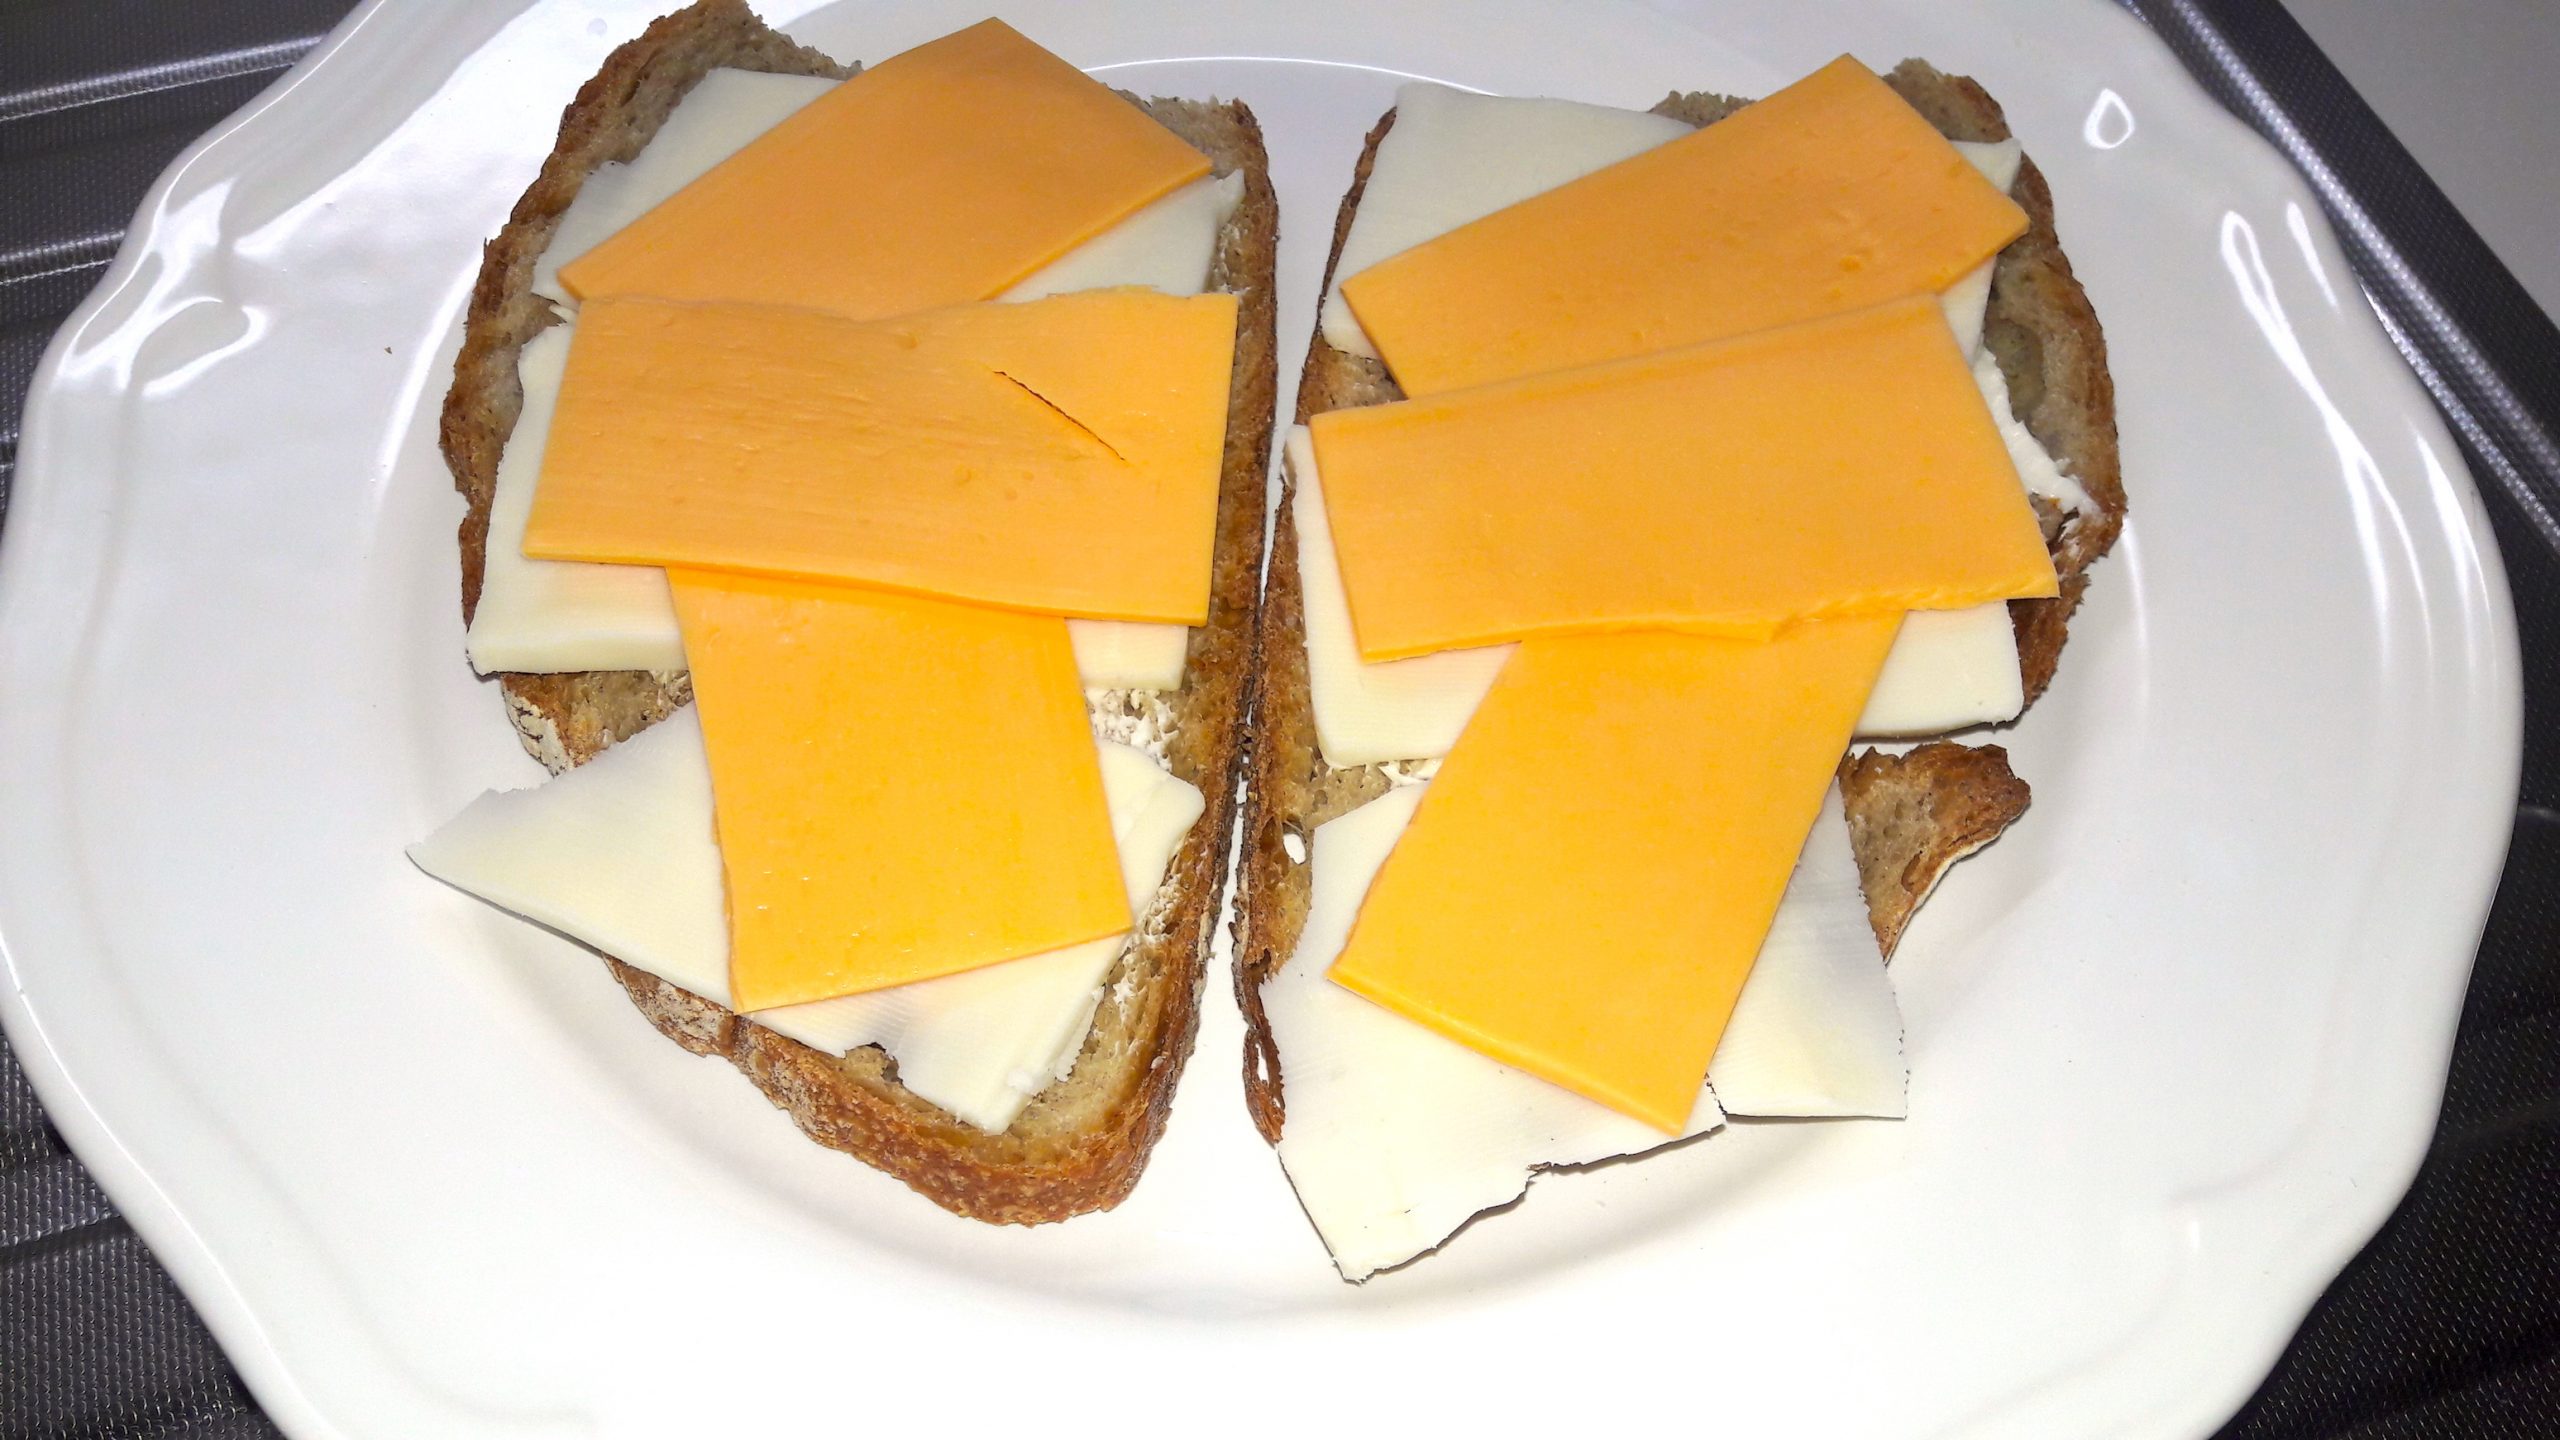 Place cheese slices on bread